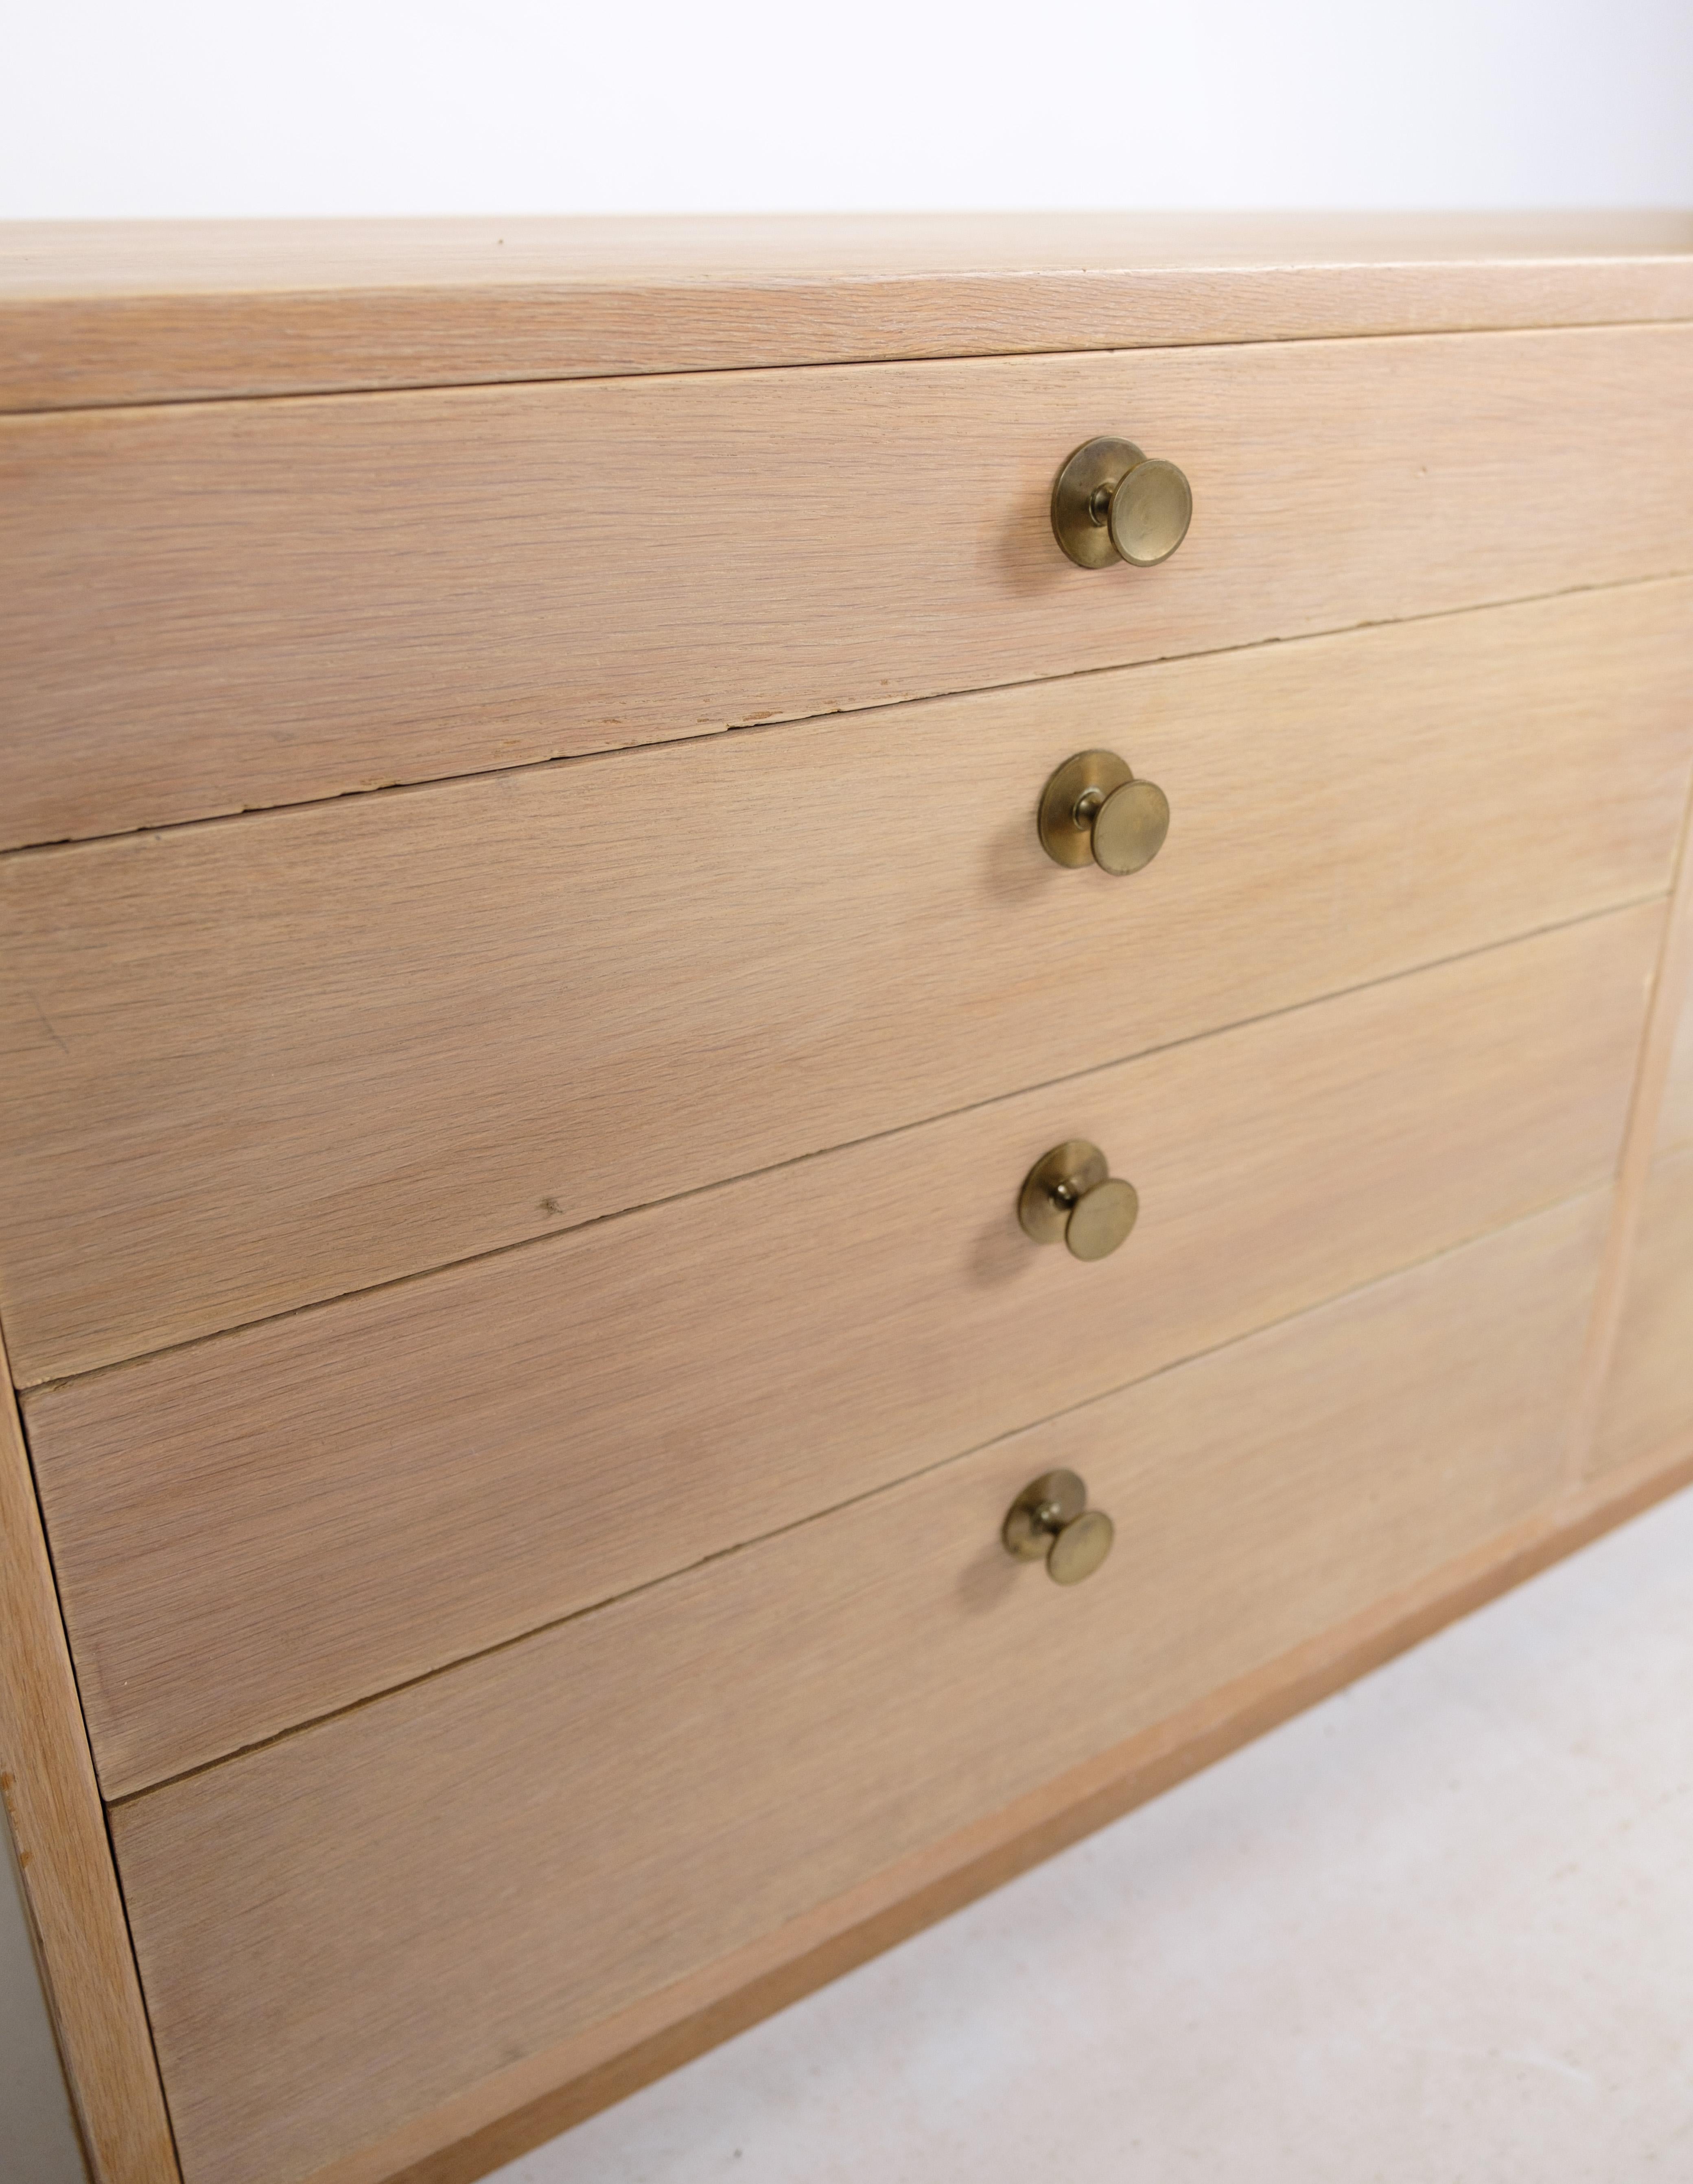 Sideboard / Chest of drawers, designed by Børge Mogensen of oak with 8 drawers and brass handles from around the 1960s.
Measurements in cm: H:69 W:135 D:54